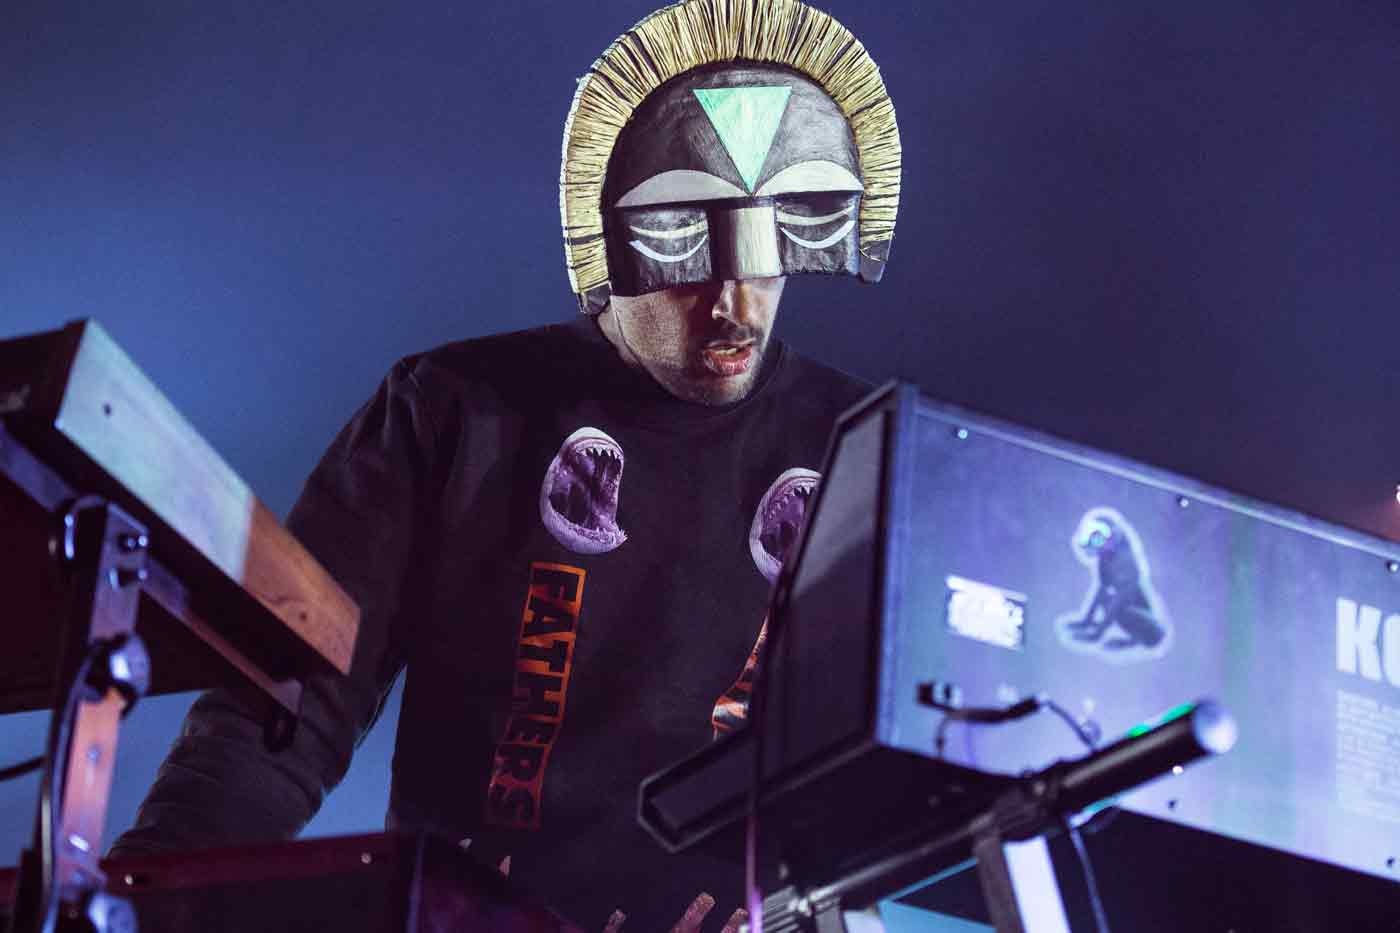 SBTRKT Shares Five New Songs, Including Collaboration with Big K.R.I.T.